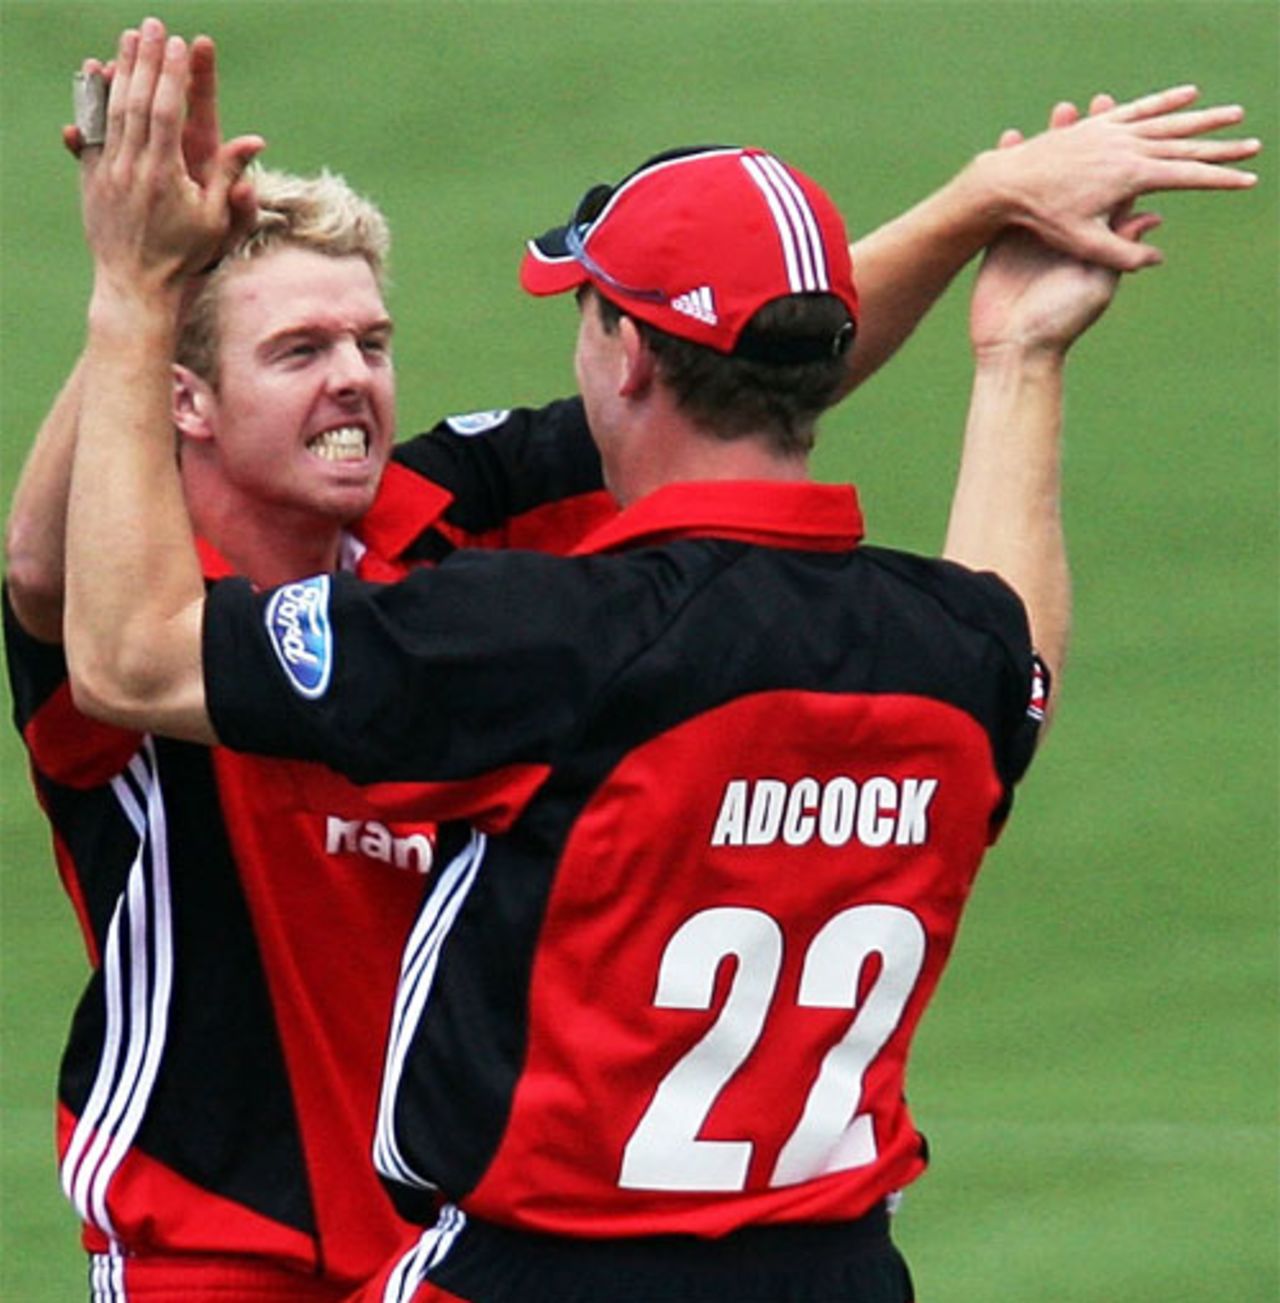 Dan Cullen celebrates with his captain Nathan Adcock as he takes one of his three wickets, South Australia v New South Wales, Adelaide, November 7, 2007